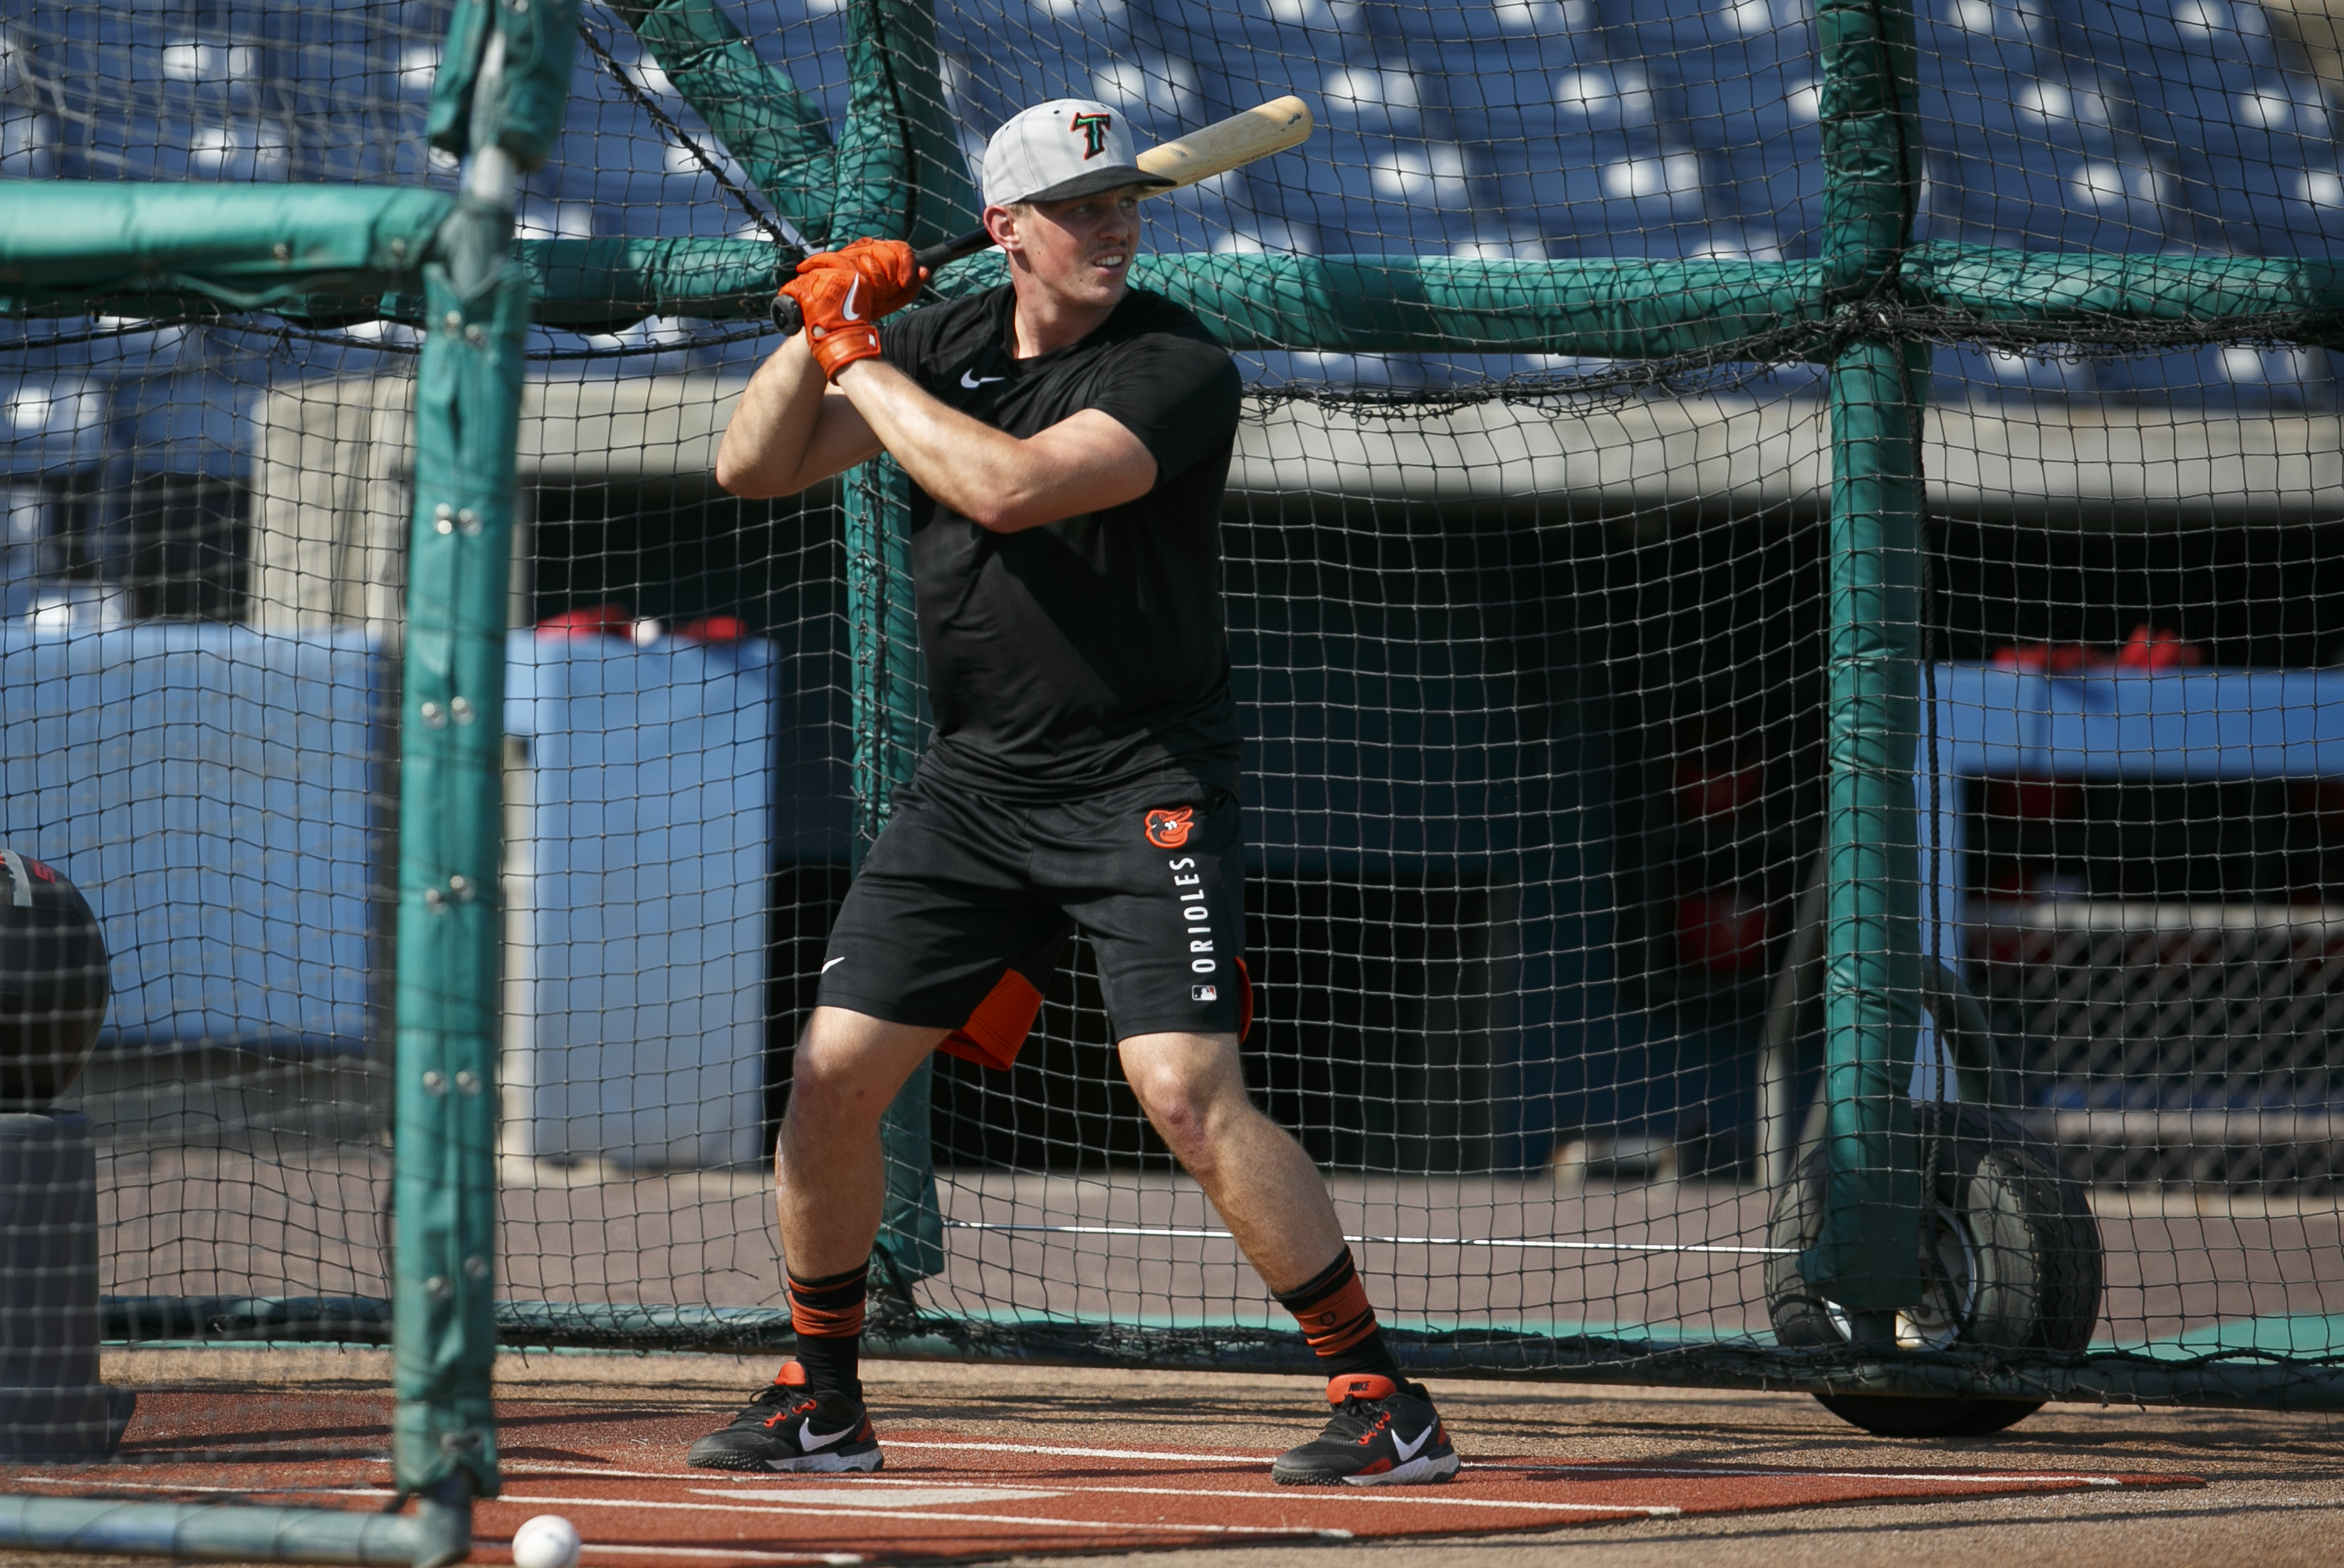 Orioles' top prospect Rutschman promoted, now one step from majors